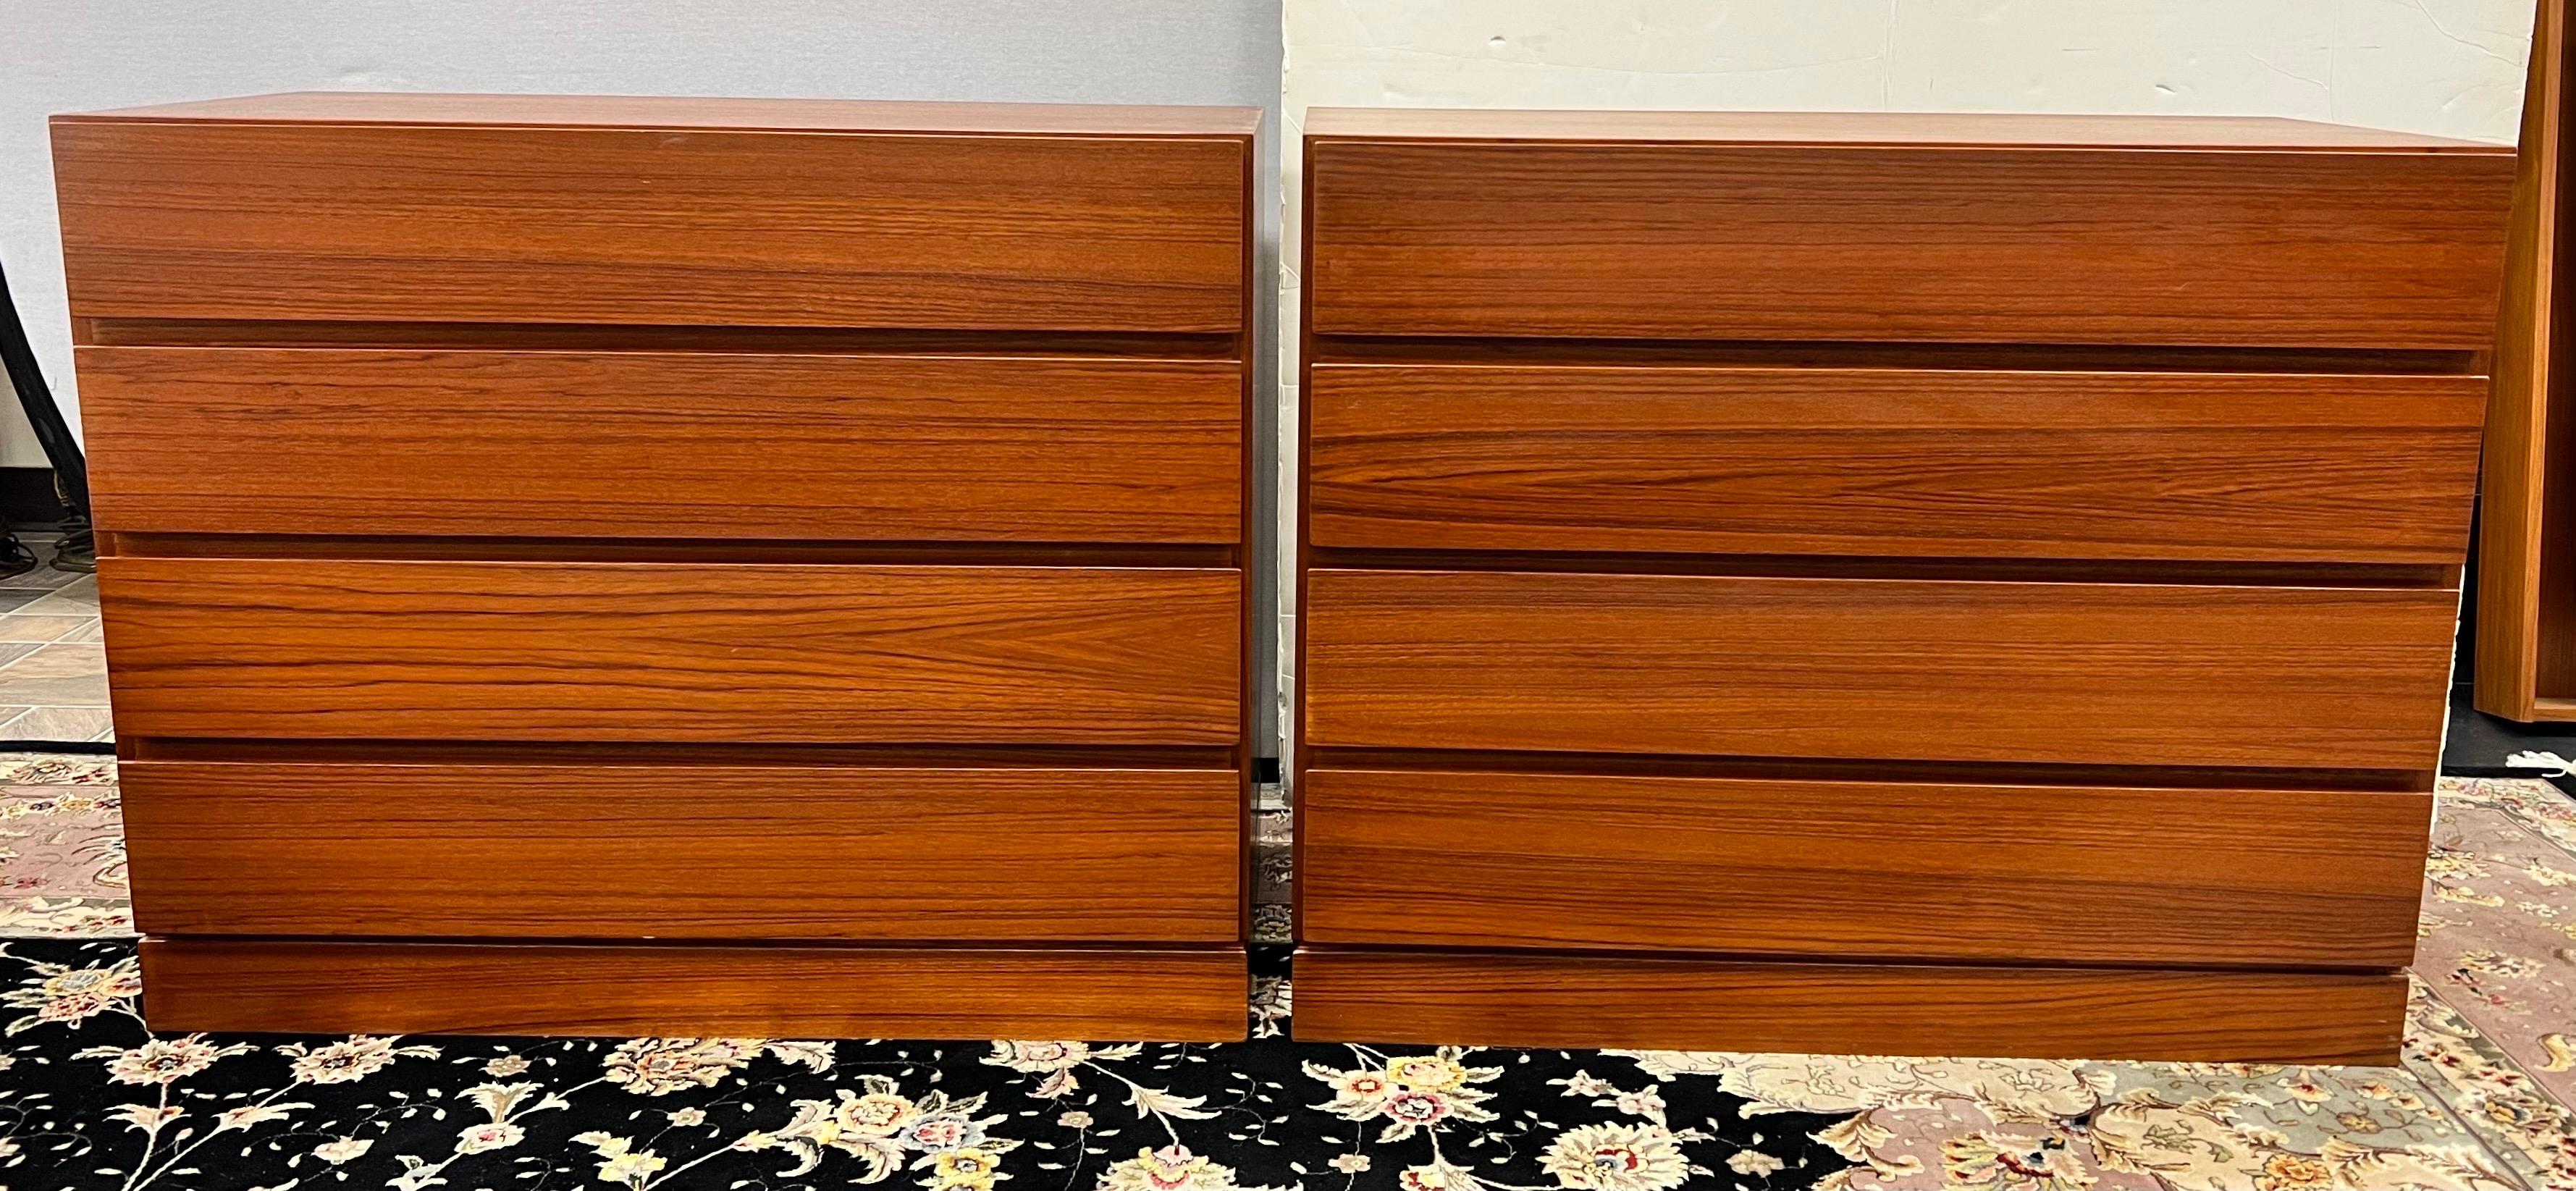 Exquisite pair of matching Arne Wahl Iversen four drawer teak dressers. All original
with Danish Control hallmarks. This piece offers plenty of storage including four dovetailed drawers with inset sculpted handles that run across the entire front.